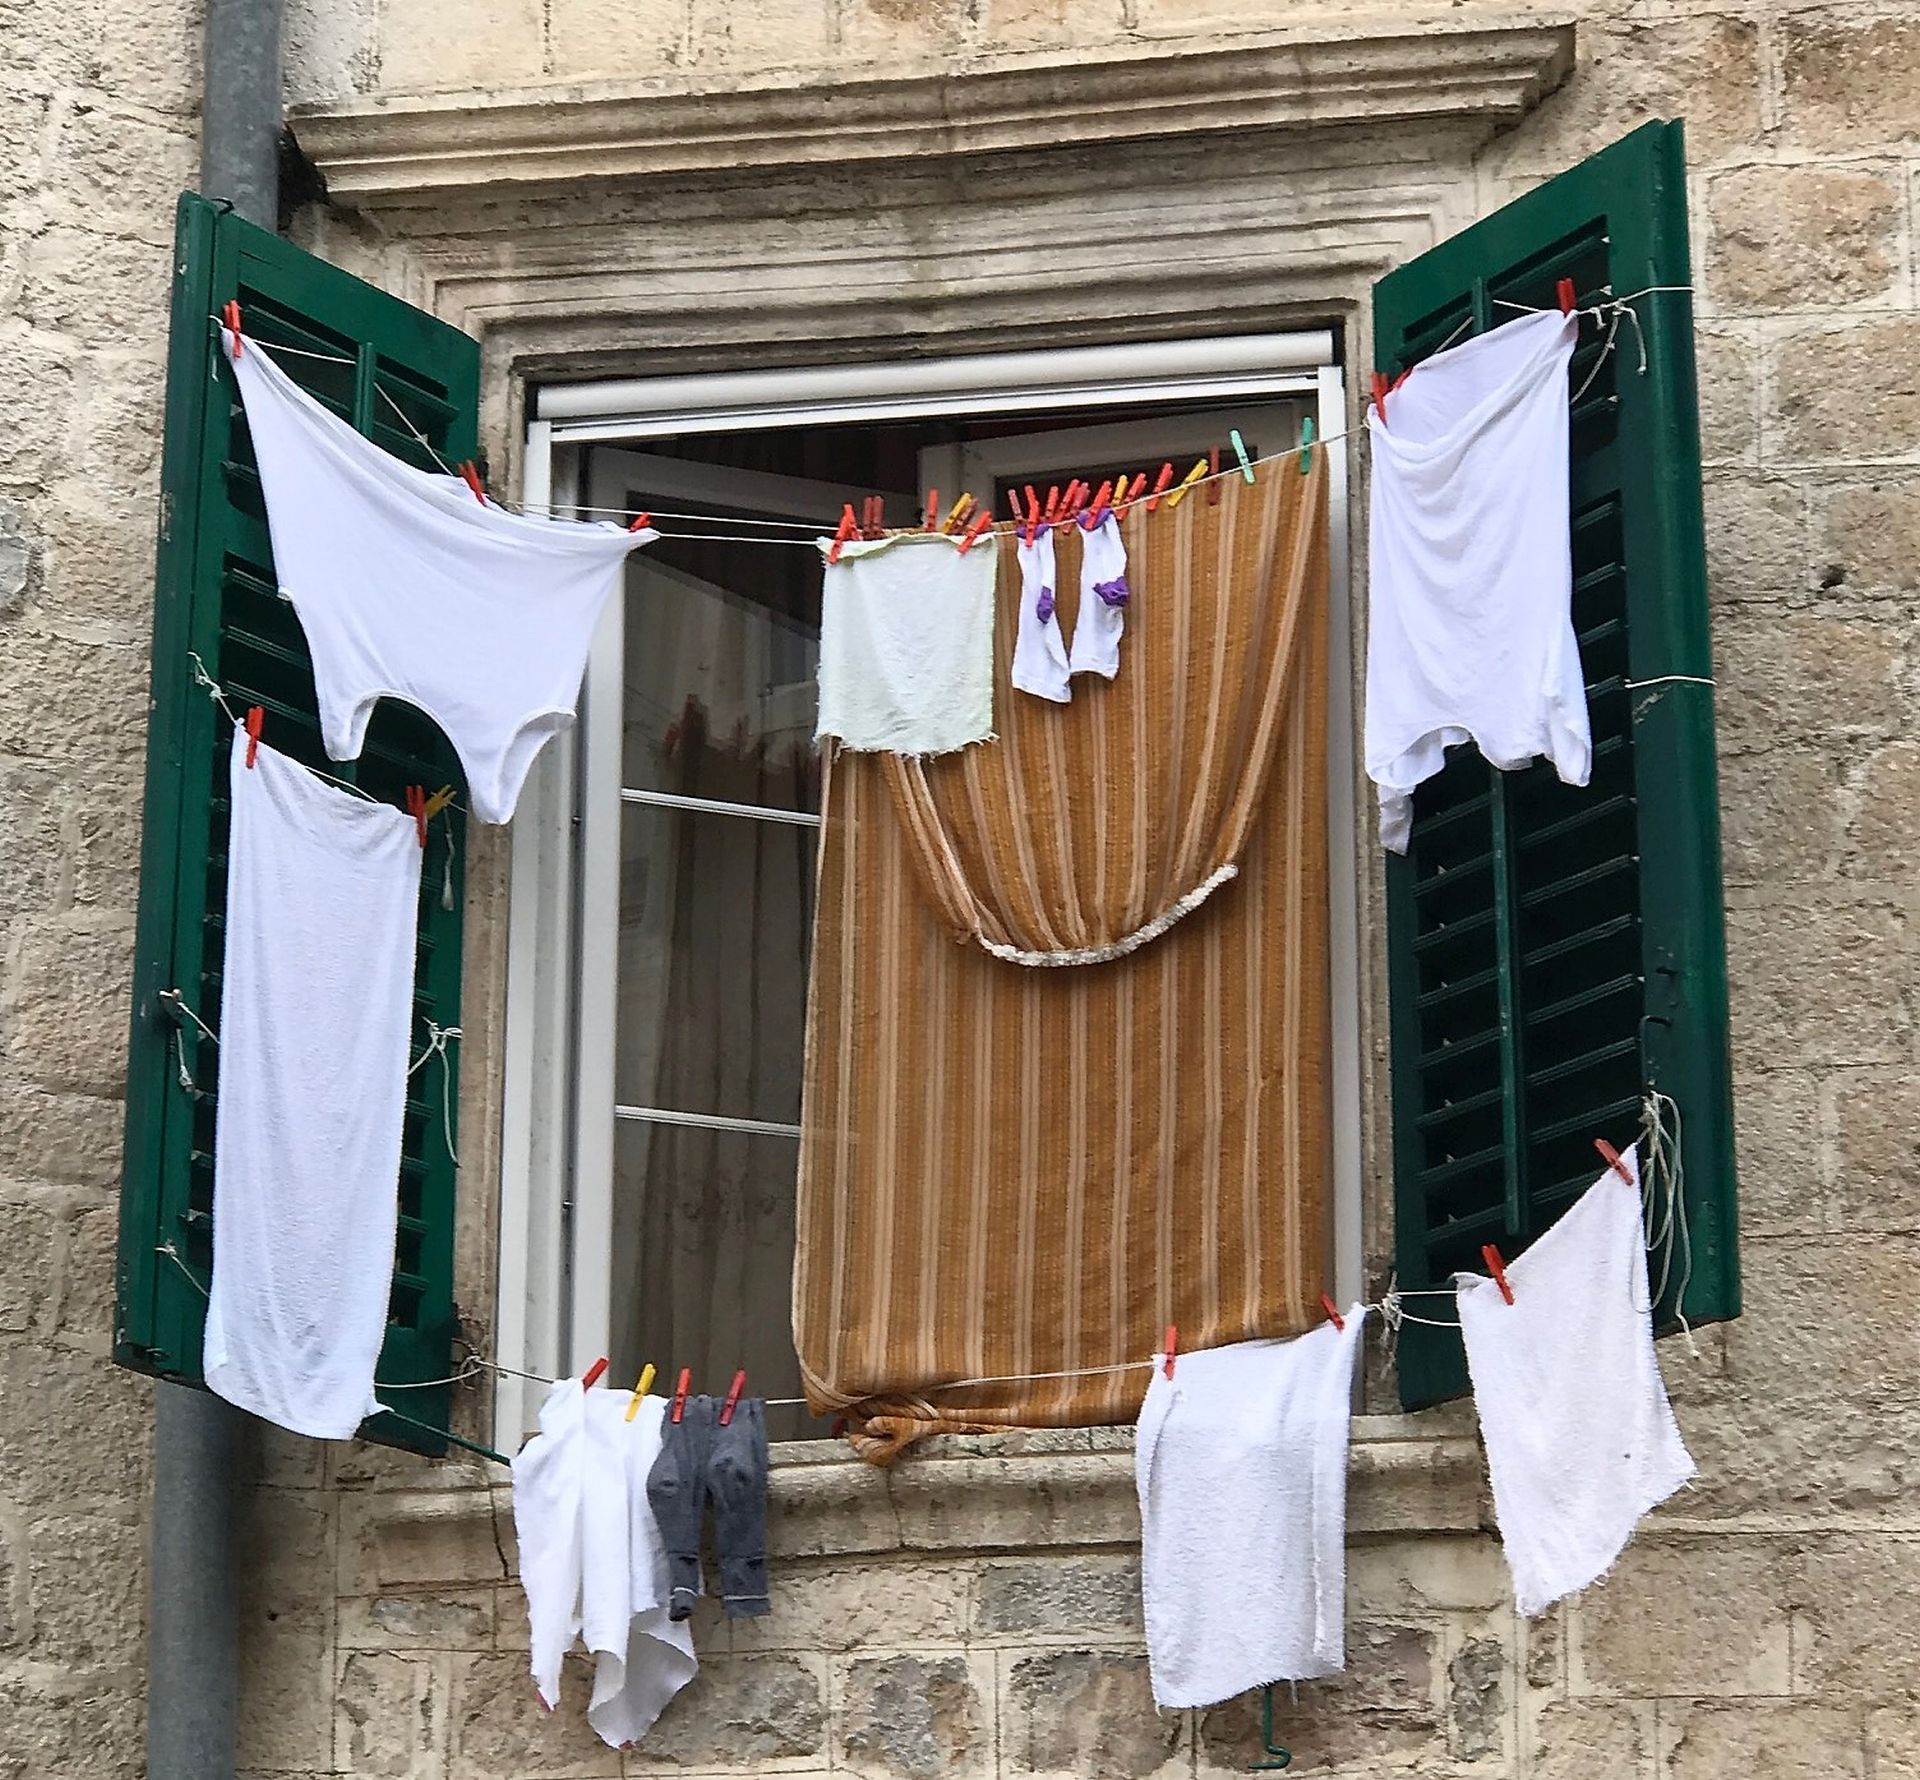 Kotor window and laundry